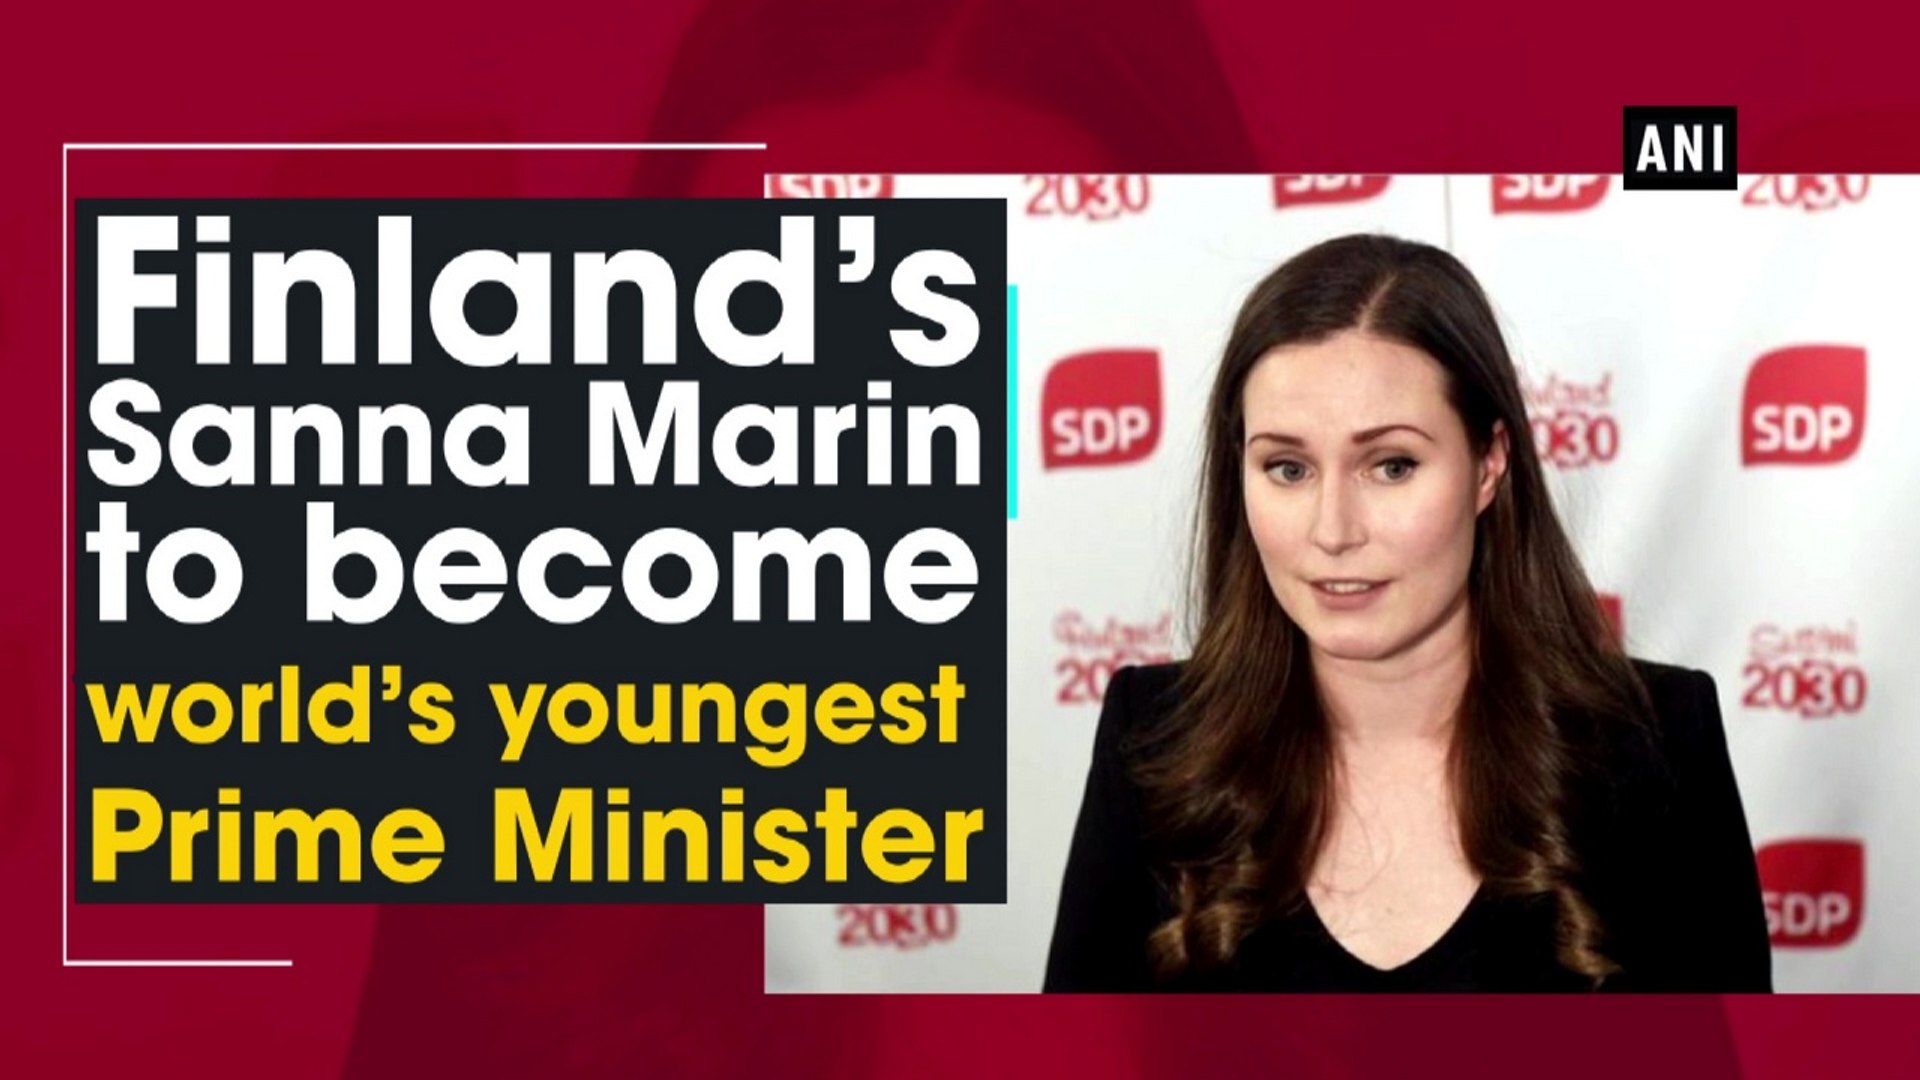 Finland's Sanna Marin to become world's youngest Prime Minister - video Dailymotion